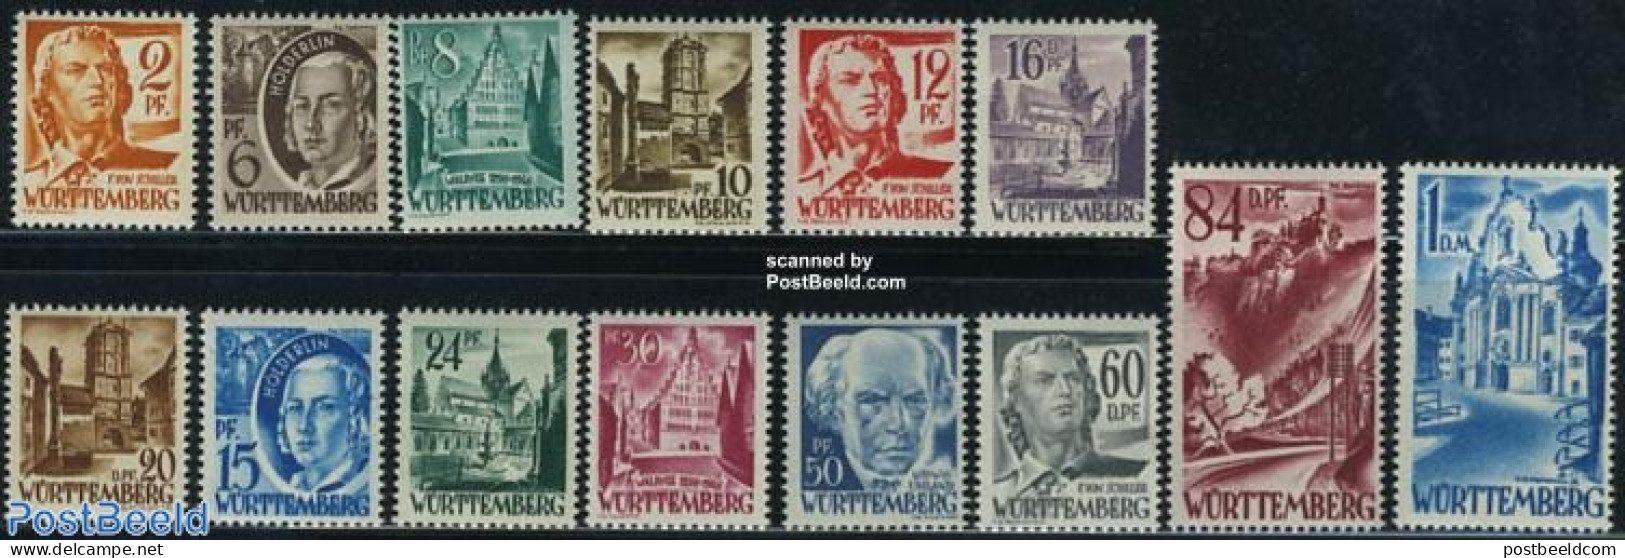 Germany, French Zone 1948 Wurttemberg, Definitives 14v, Unused (hinged), Religion - Churches, Temples, Mosques, Synago.. - Kerken En Kathedralen